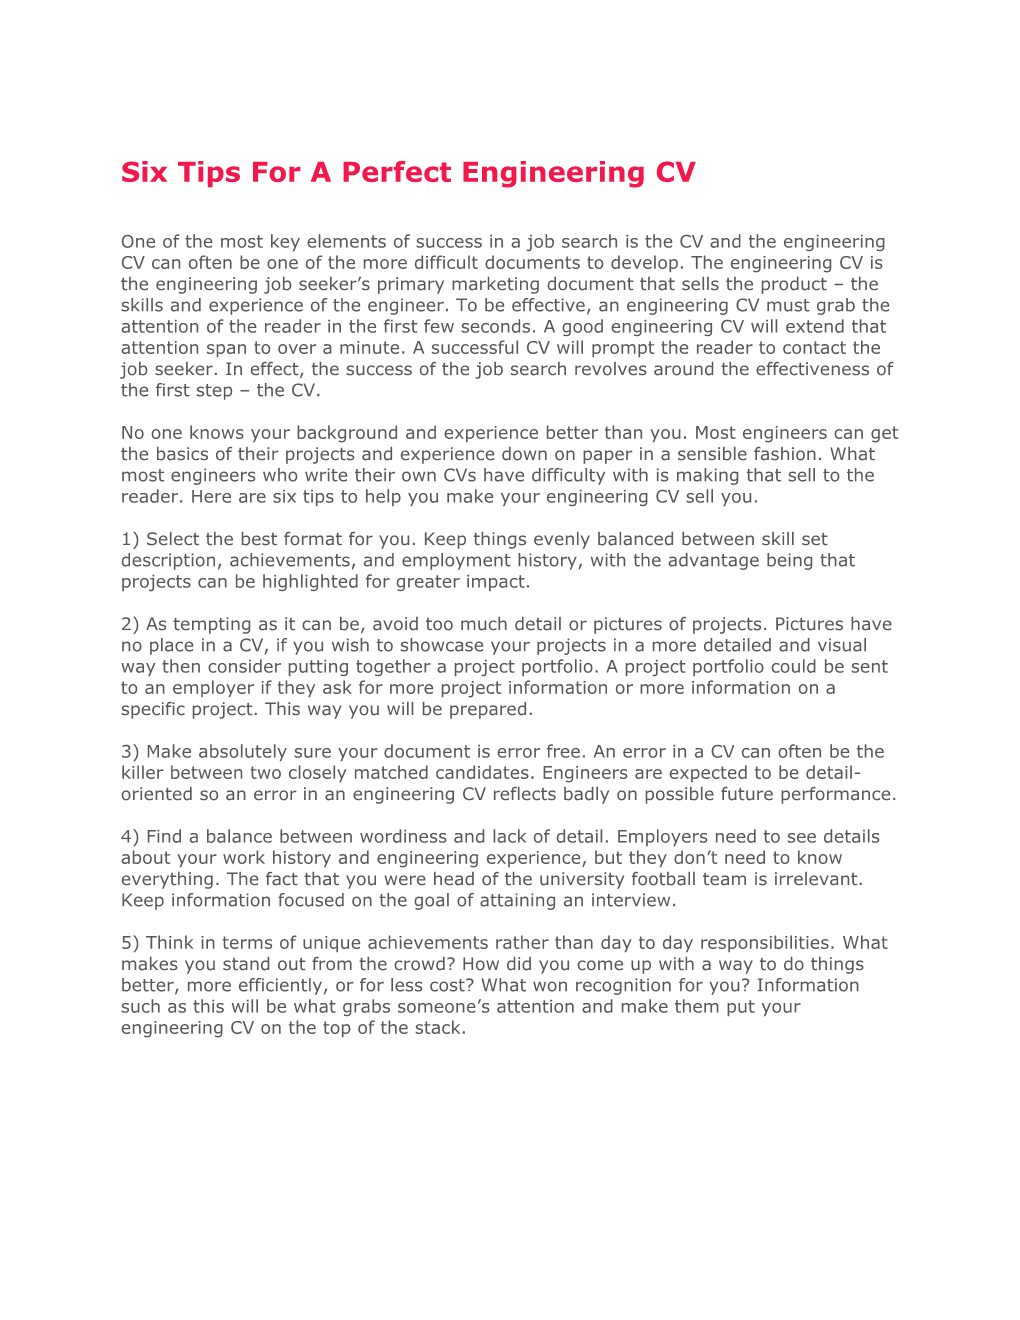 Six Tips for a Perfect Engineering CV